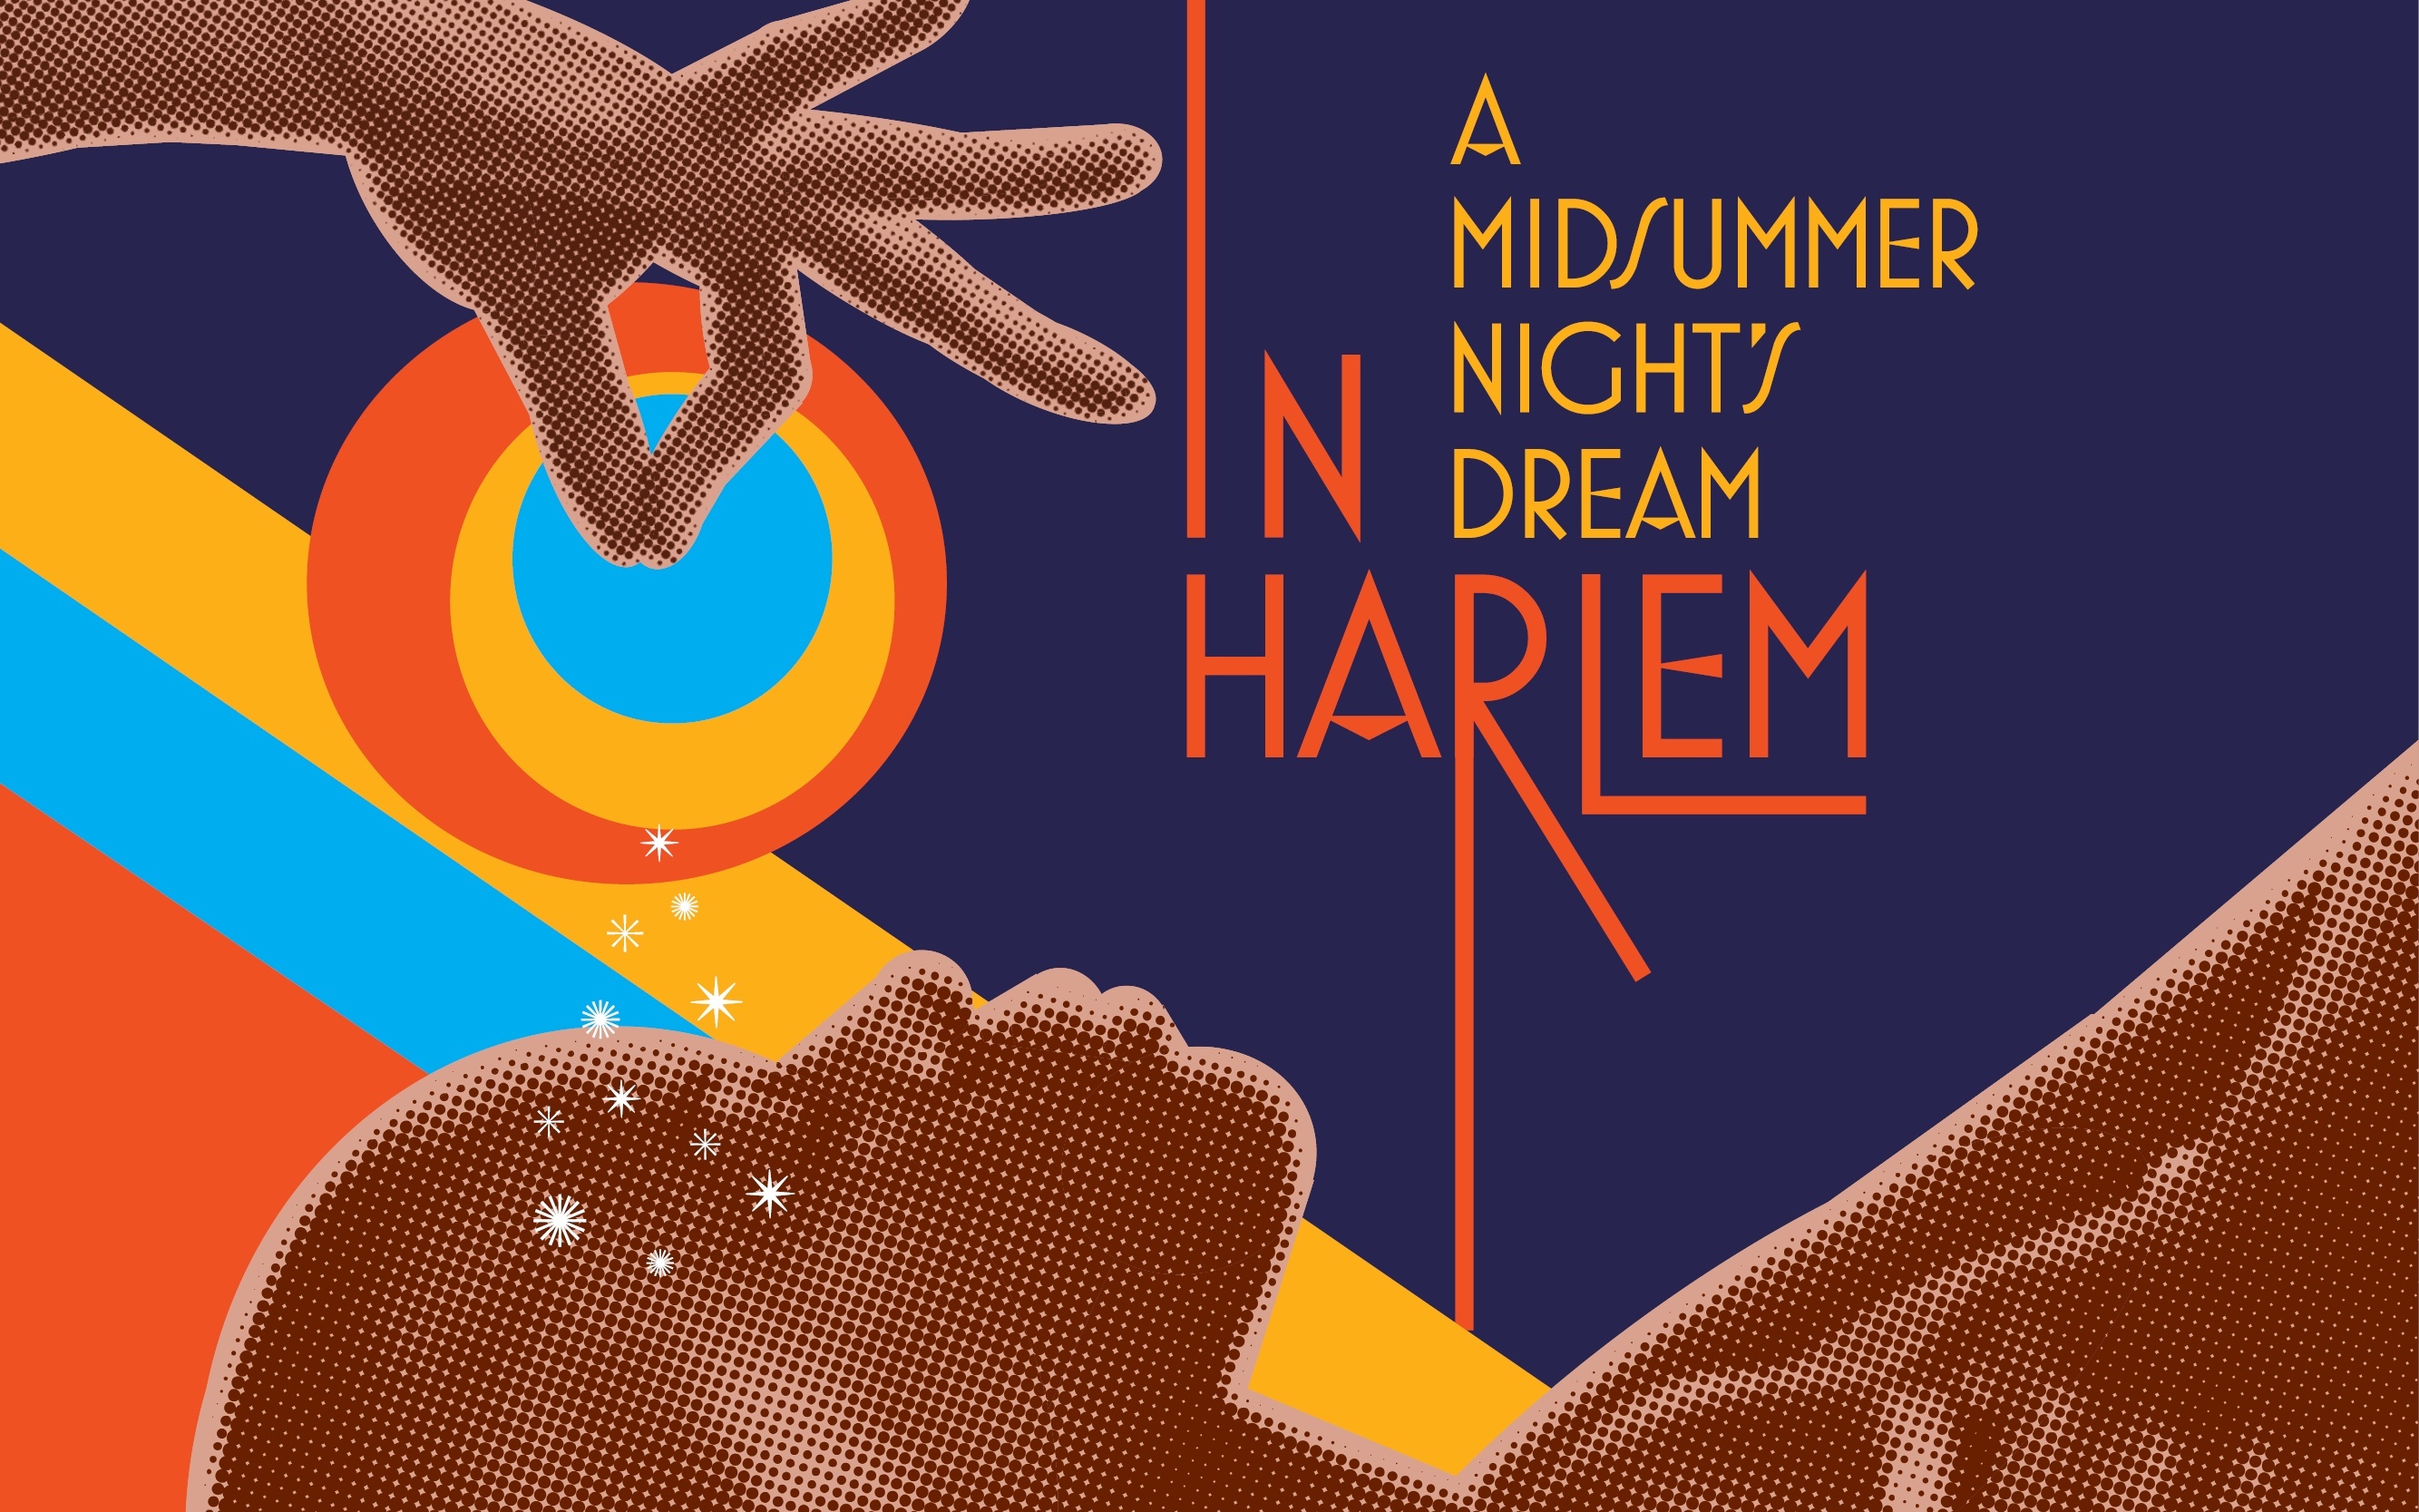 Click to buy group tickets to A Midsummer Night's Dream in Harlem